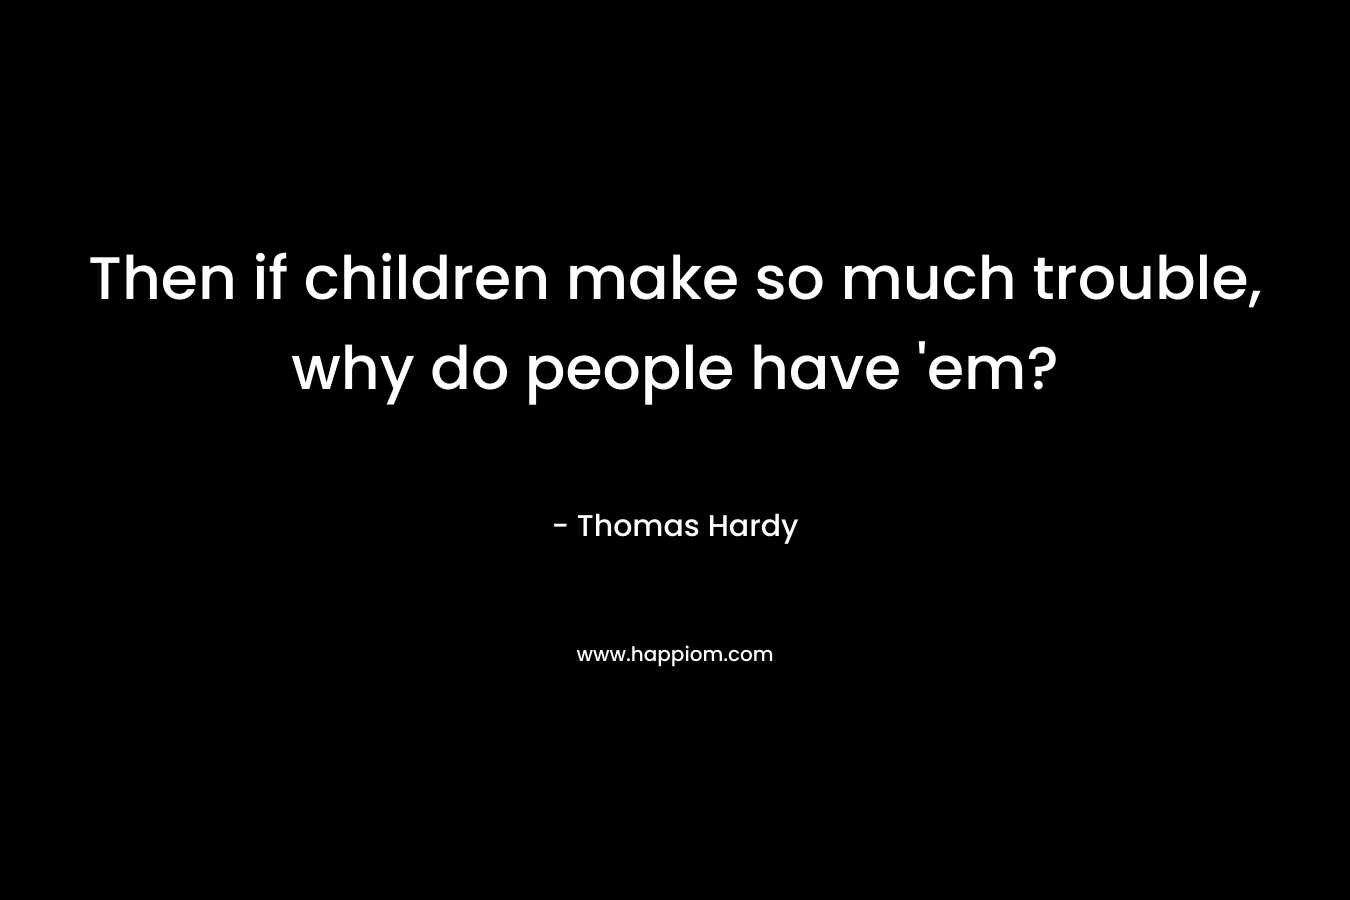 Then if children make so much trouble, why do people have 'em?